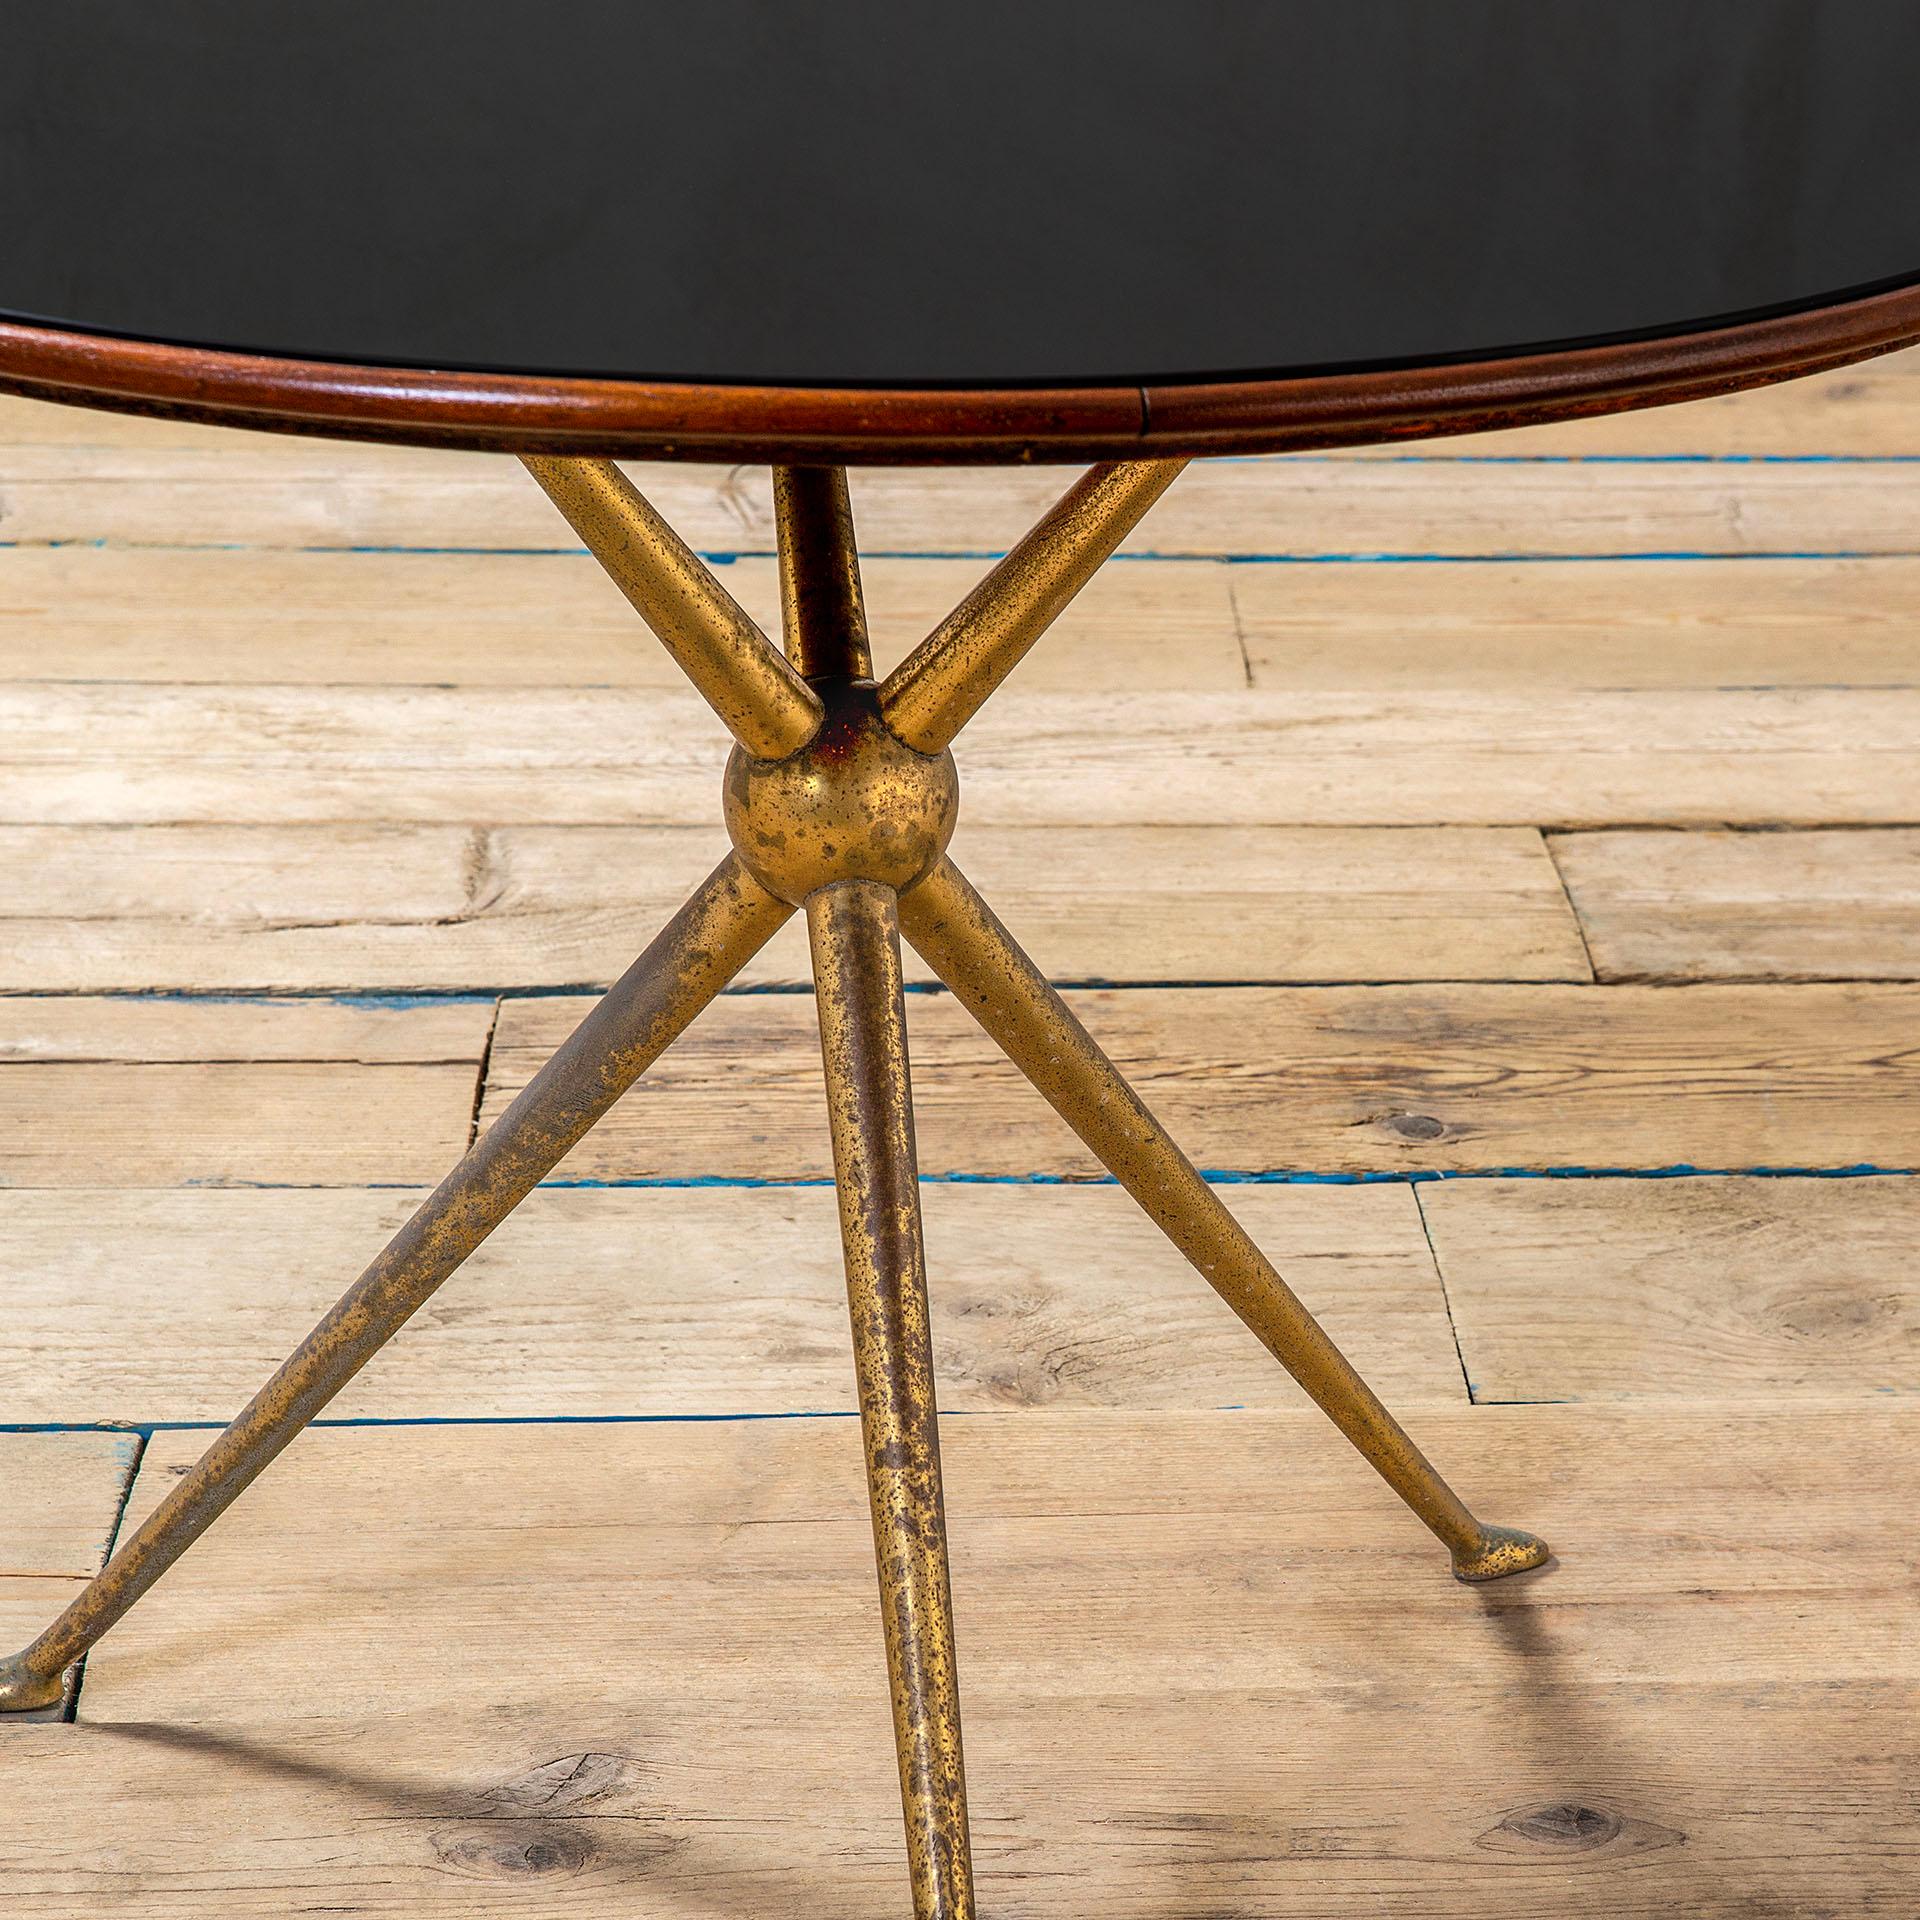 20th Century Osvaldo Borsani Tripod Side Table Brass, Wood and Glass for Abv 50s In Good Condition For Sale In Turin, Turin